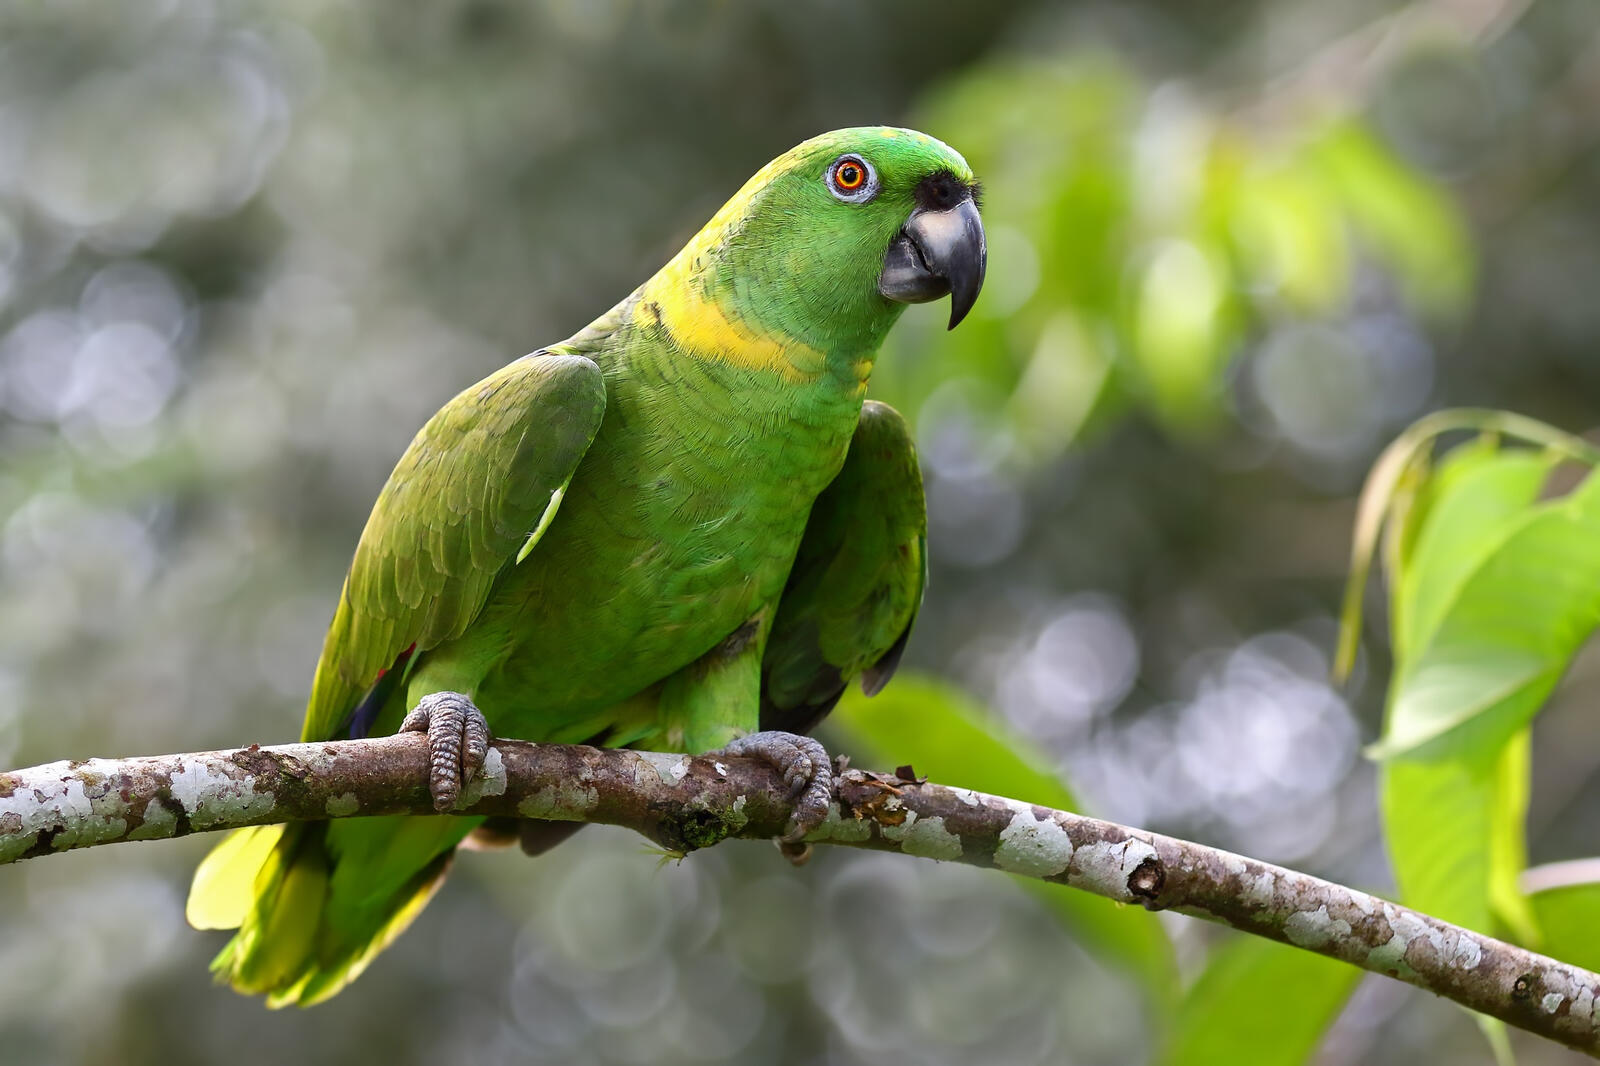 A green parrot sits on a tree branch